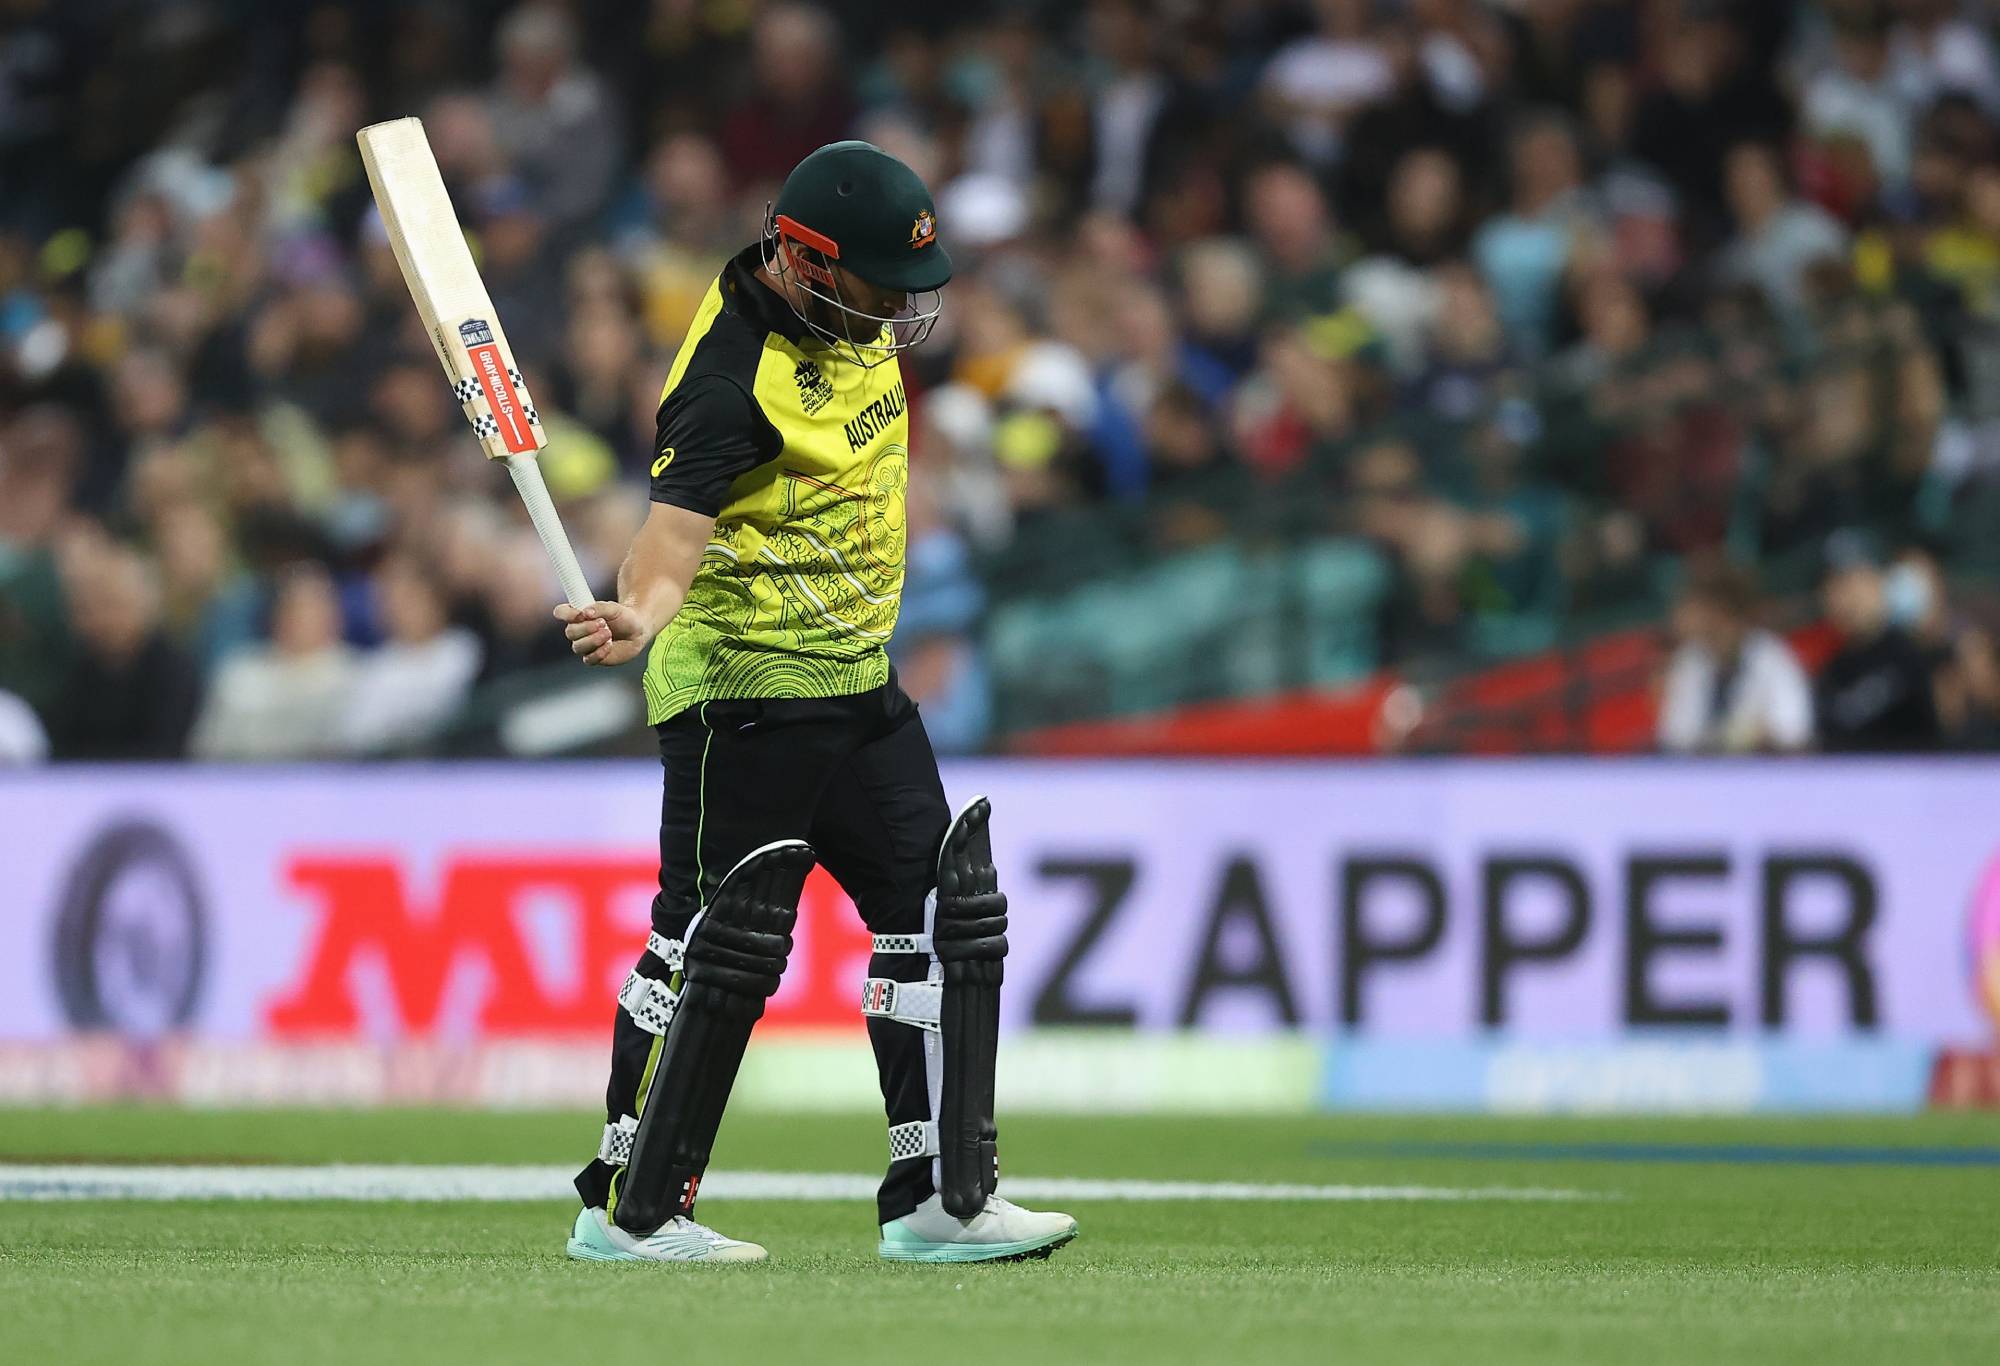 SYDNEY, AUSTRALIA - OCTOBER 22: Aaron Finch of Australia leaves the pitch after being dismissed by Mitchell Santner of New Zealand during the ICC Men's T20 World Cup match between Australia and New Zealand at Sydney Cricket Ground on October 22, 2022 in Sydney, Australia.  (Photo by Mark Kolbe/Getty Images)